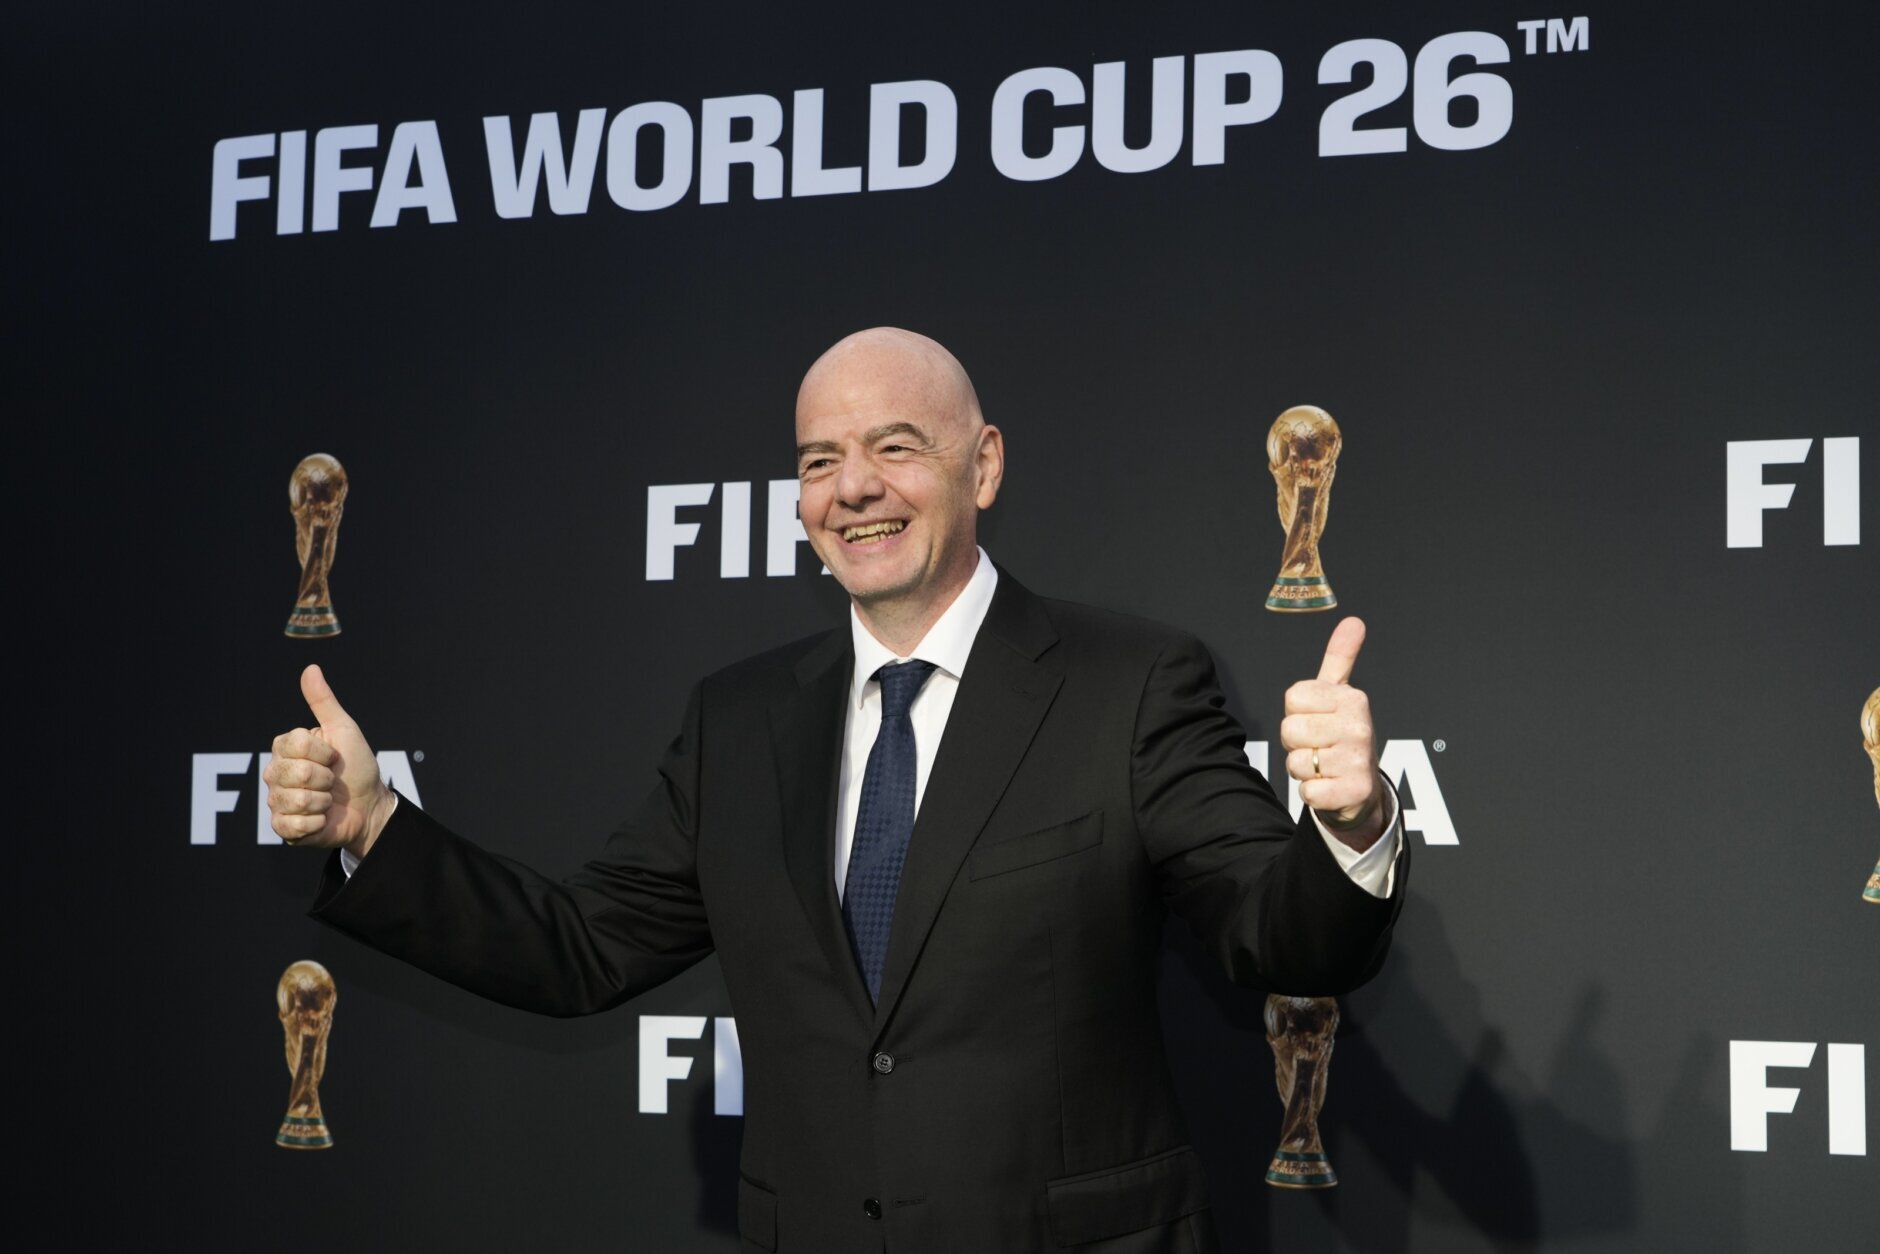 2026 World Cup logo & branding revealed by FIFA ahead of tournament in  United States, Mexico & Canada